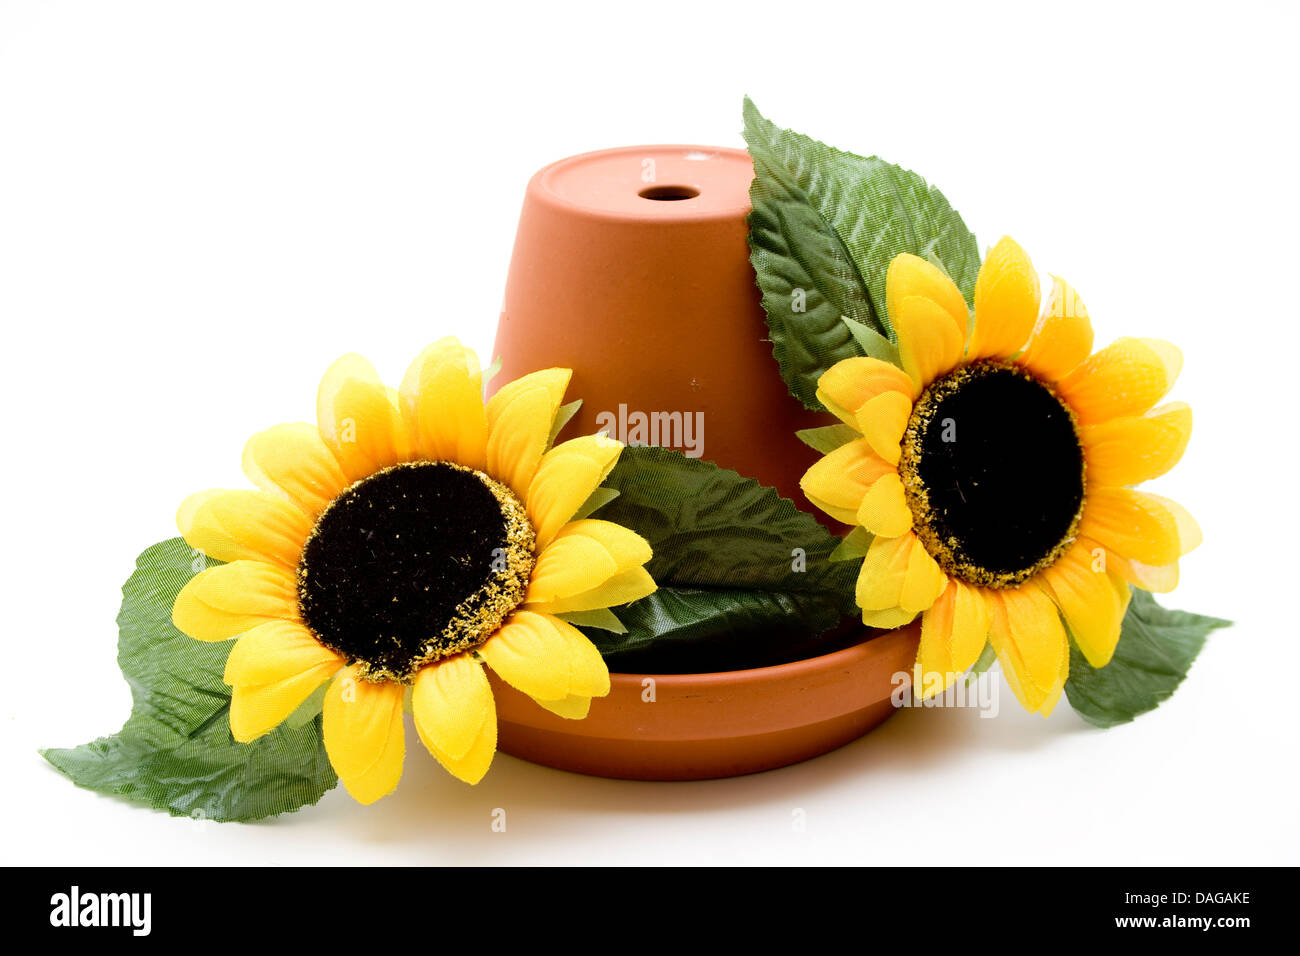 Sunflower with plant pot Stock Photo